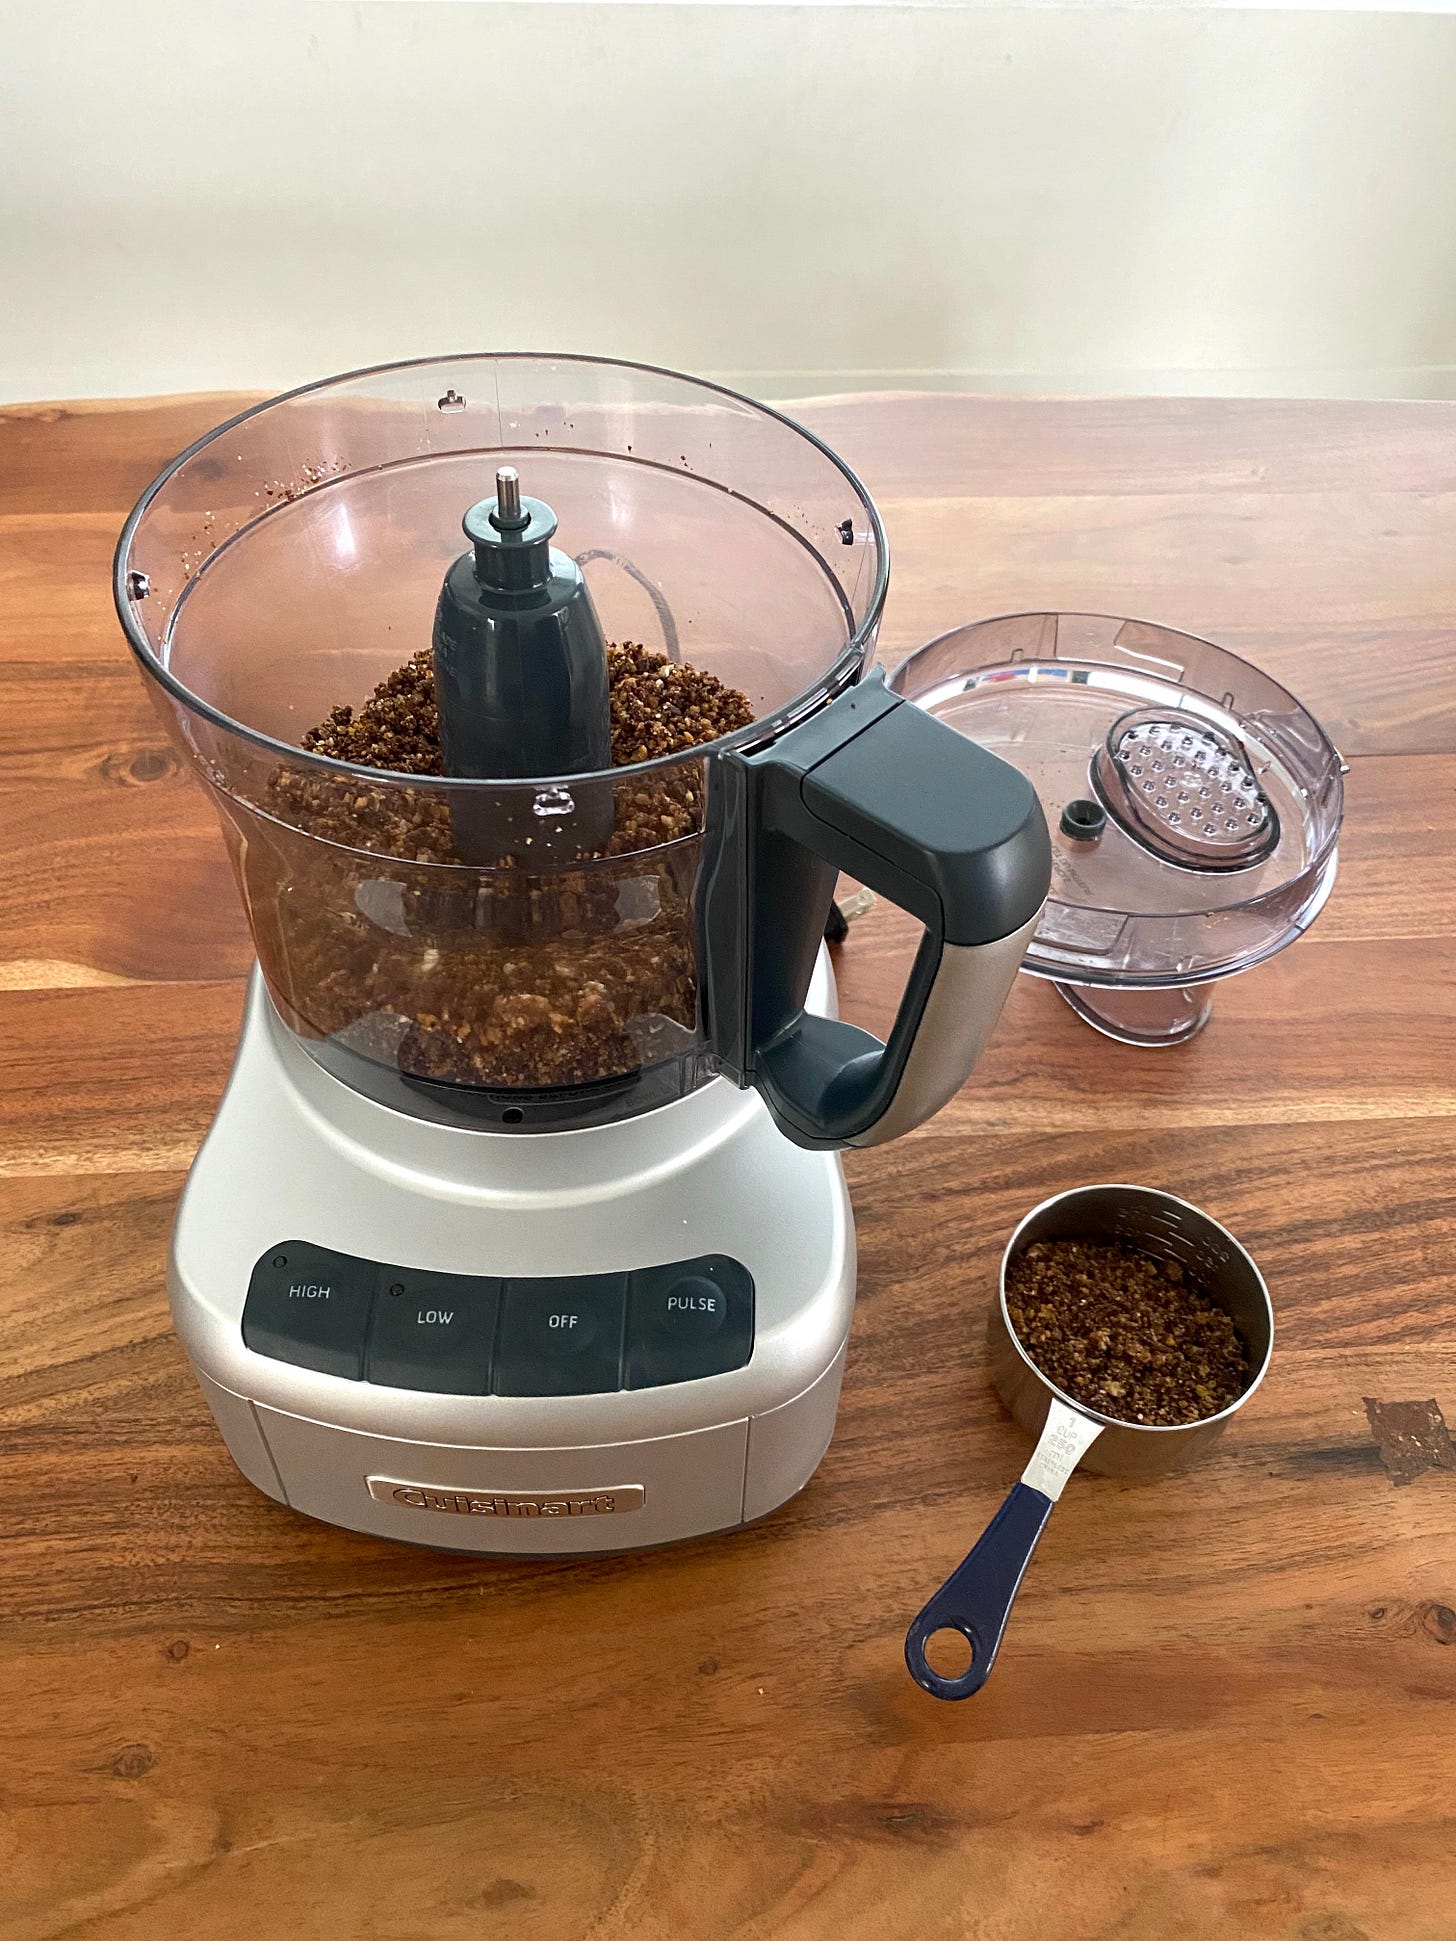 An open food processor filled with chocolate cookie crumbs rests on a wooden table. The lid and a measuring cup half-filled with cookie crumbs rests next to it.